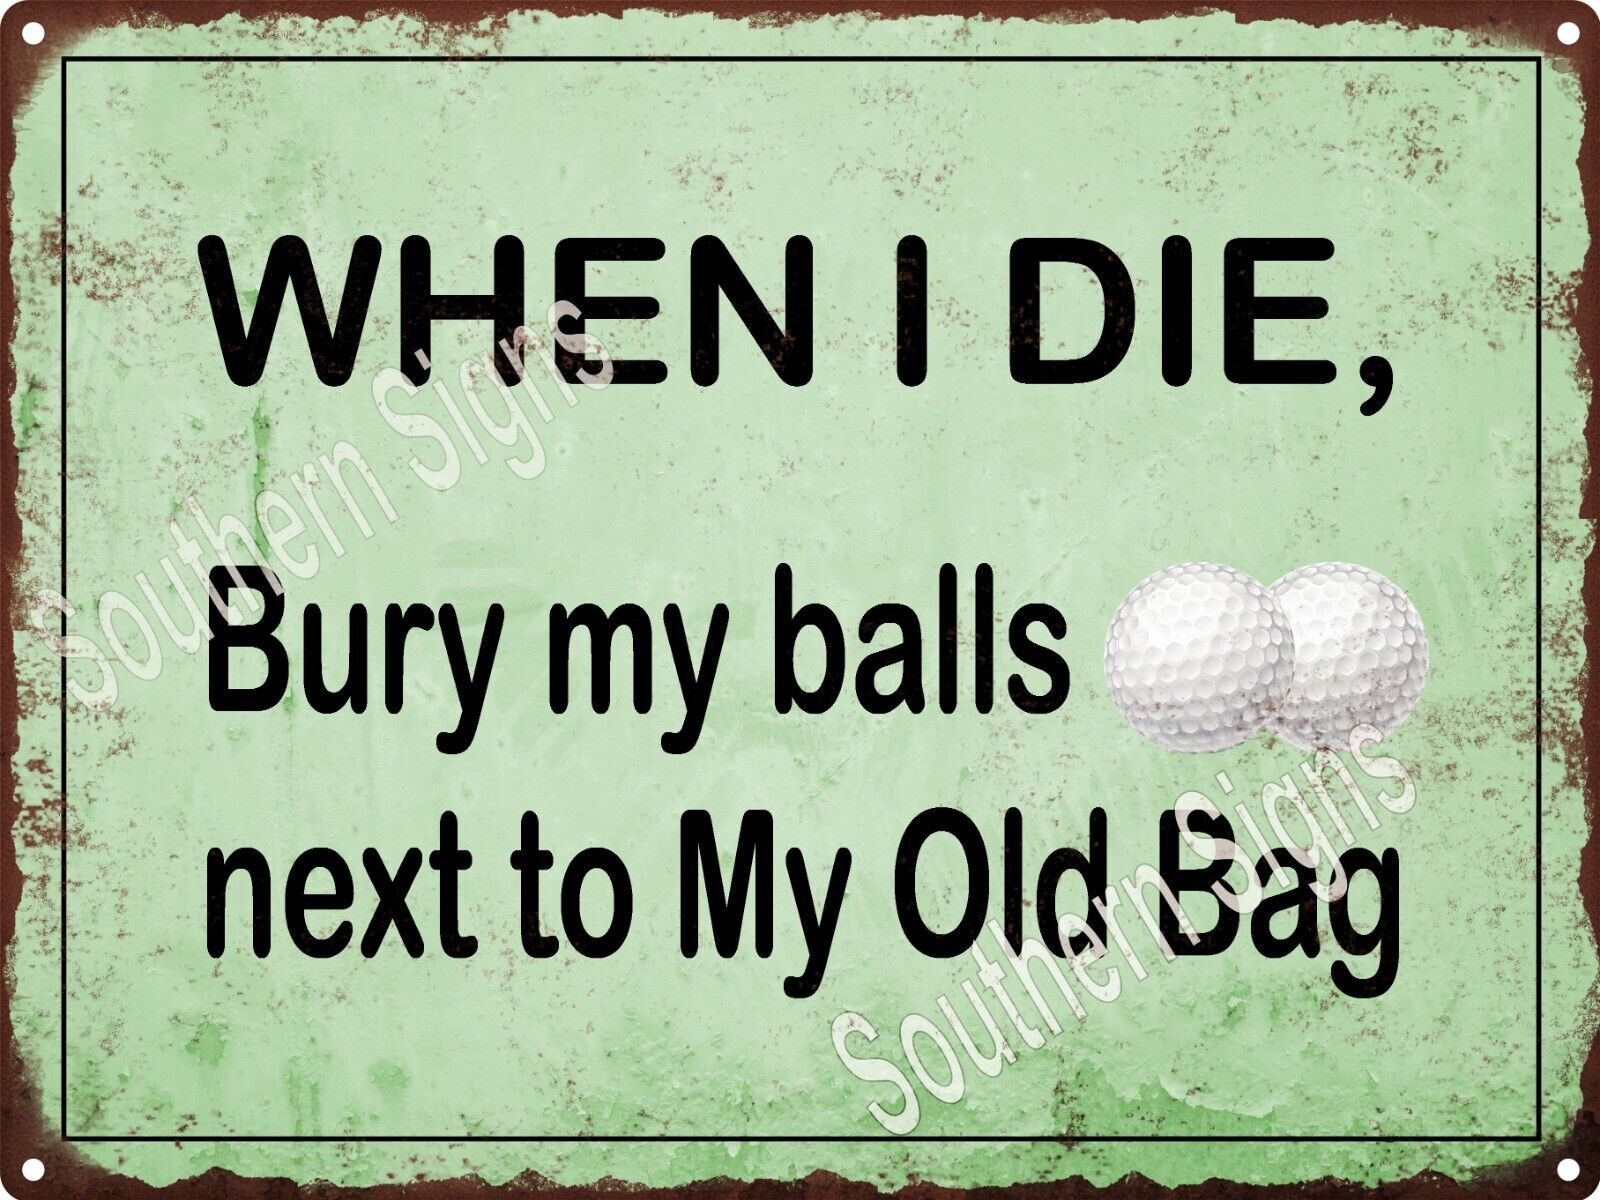 GOLF Bury My Balls Next To The Old Bag METAL SIGN VINTAGE LOOK 9X12 SS261